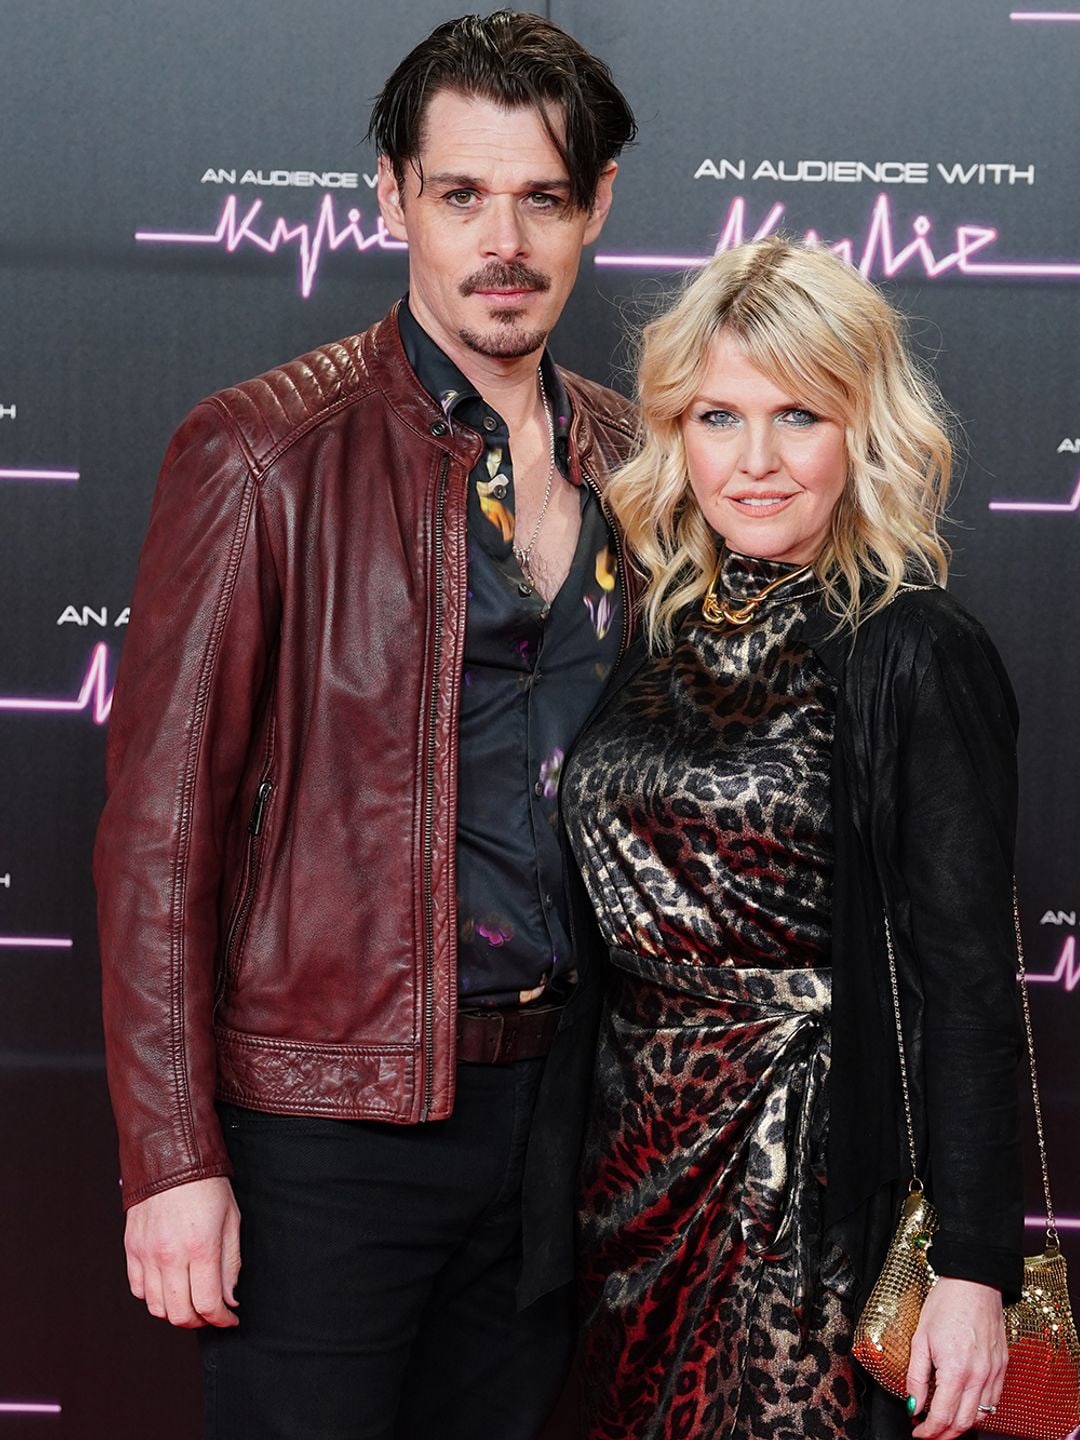 Ashley Jensen and Kenny Doughty on the red carpet